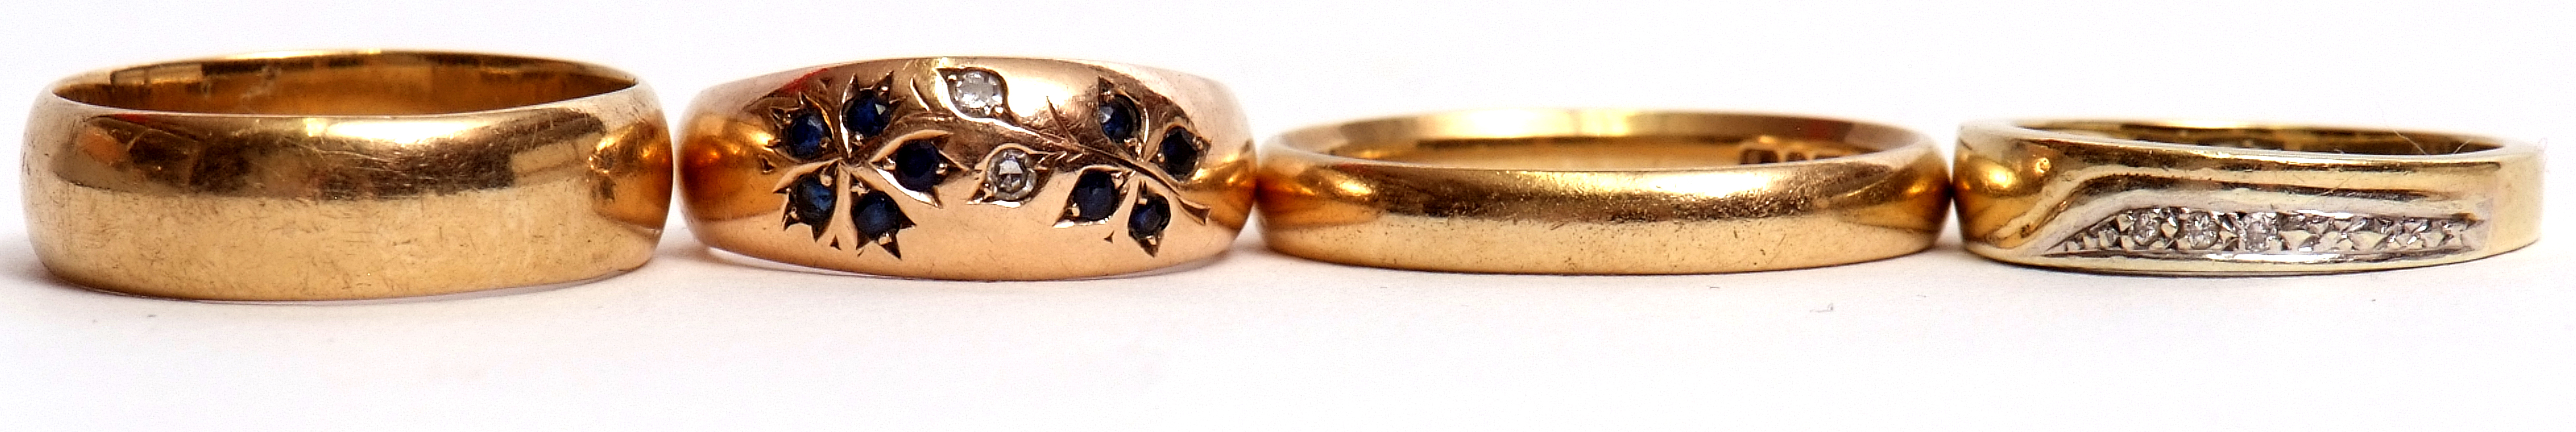 Mixed Lot: 9ct diamond and sapphire ring set in an engraved floral and leaf design, a modern